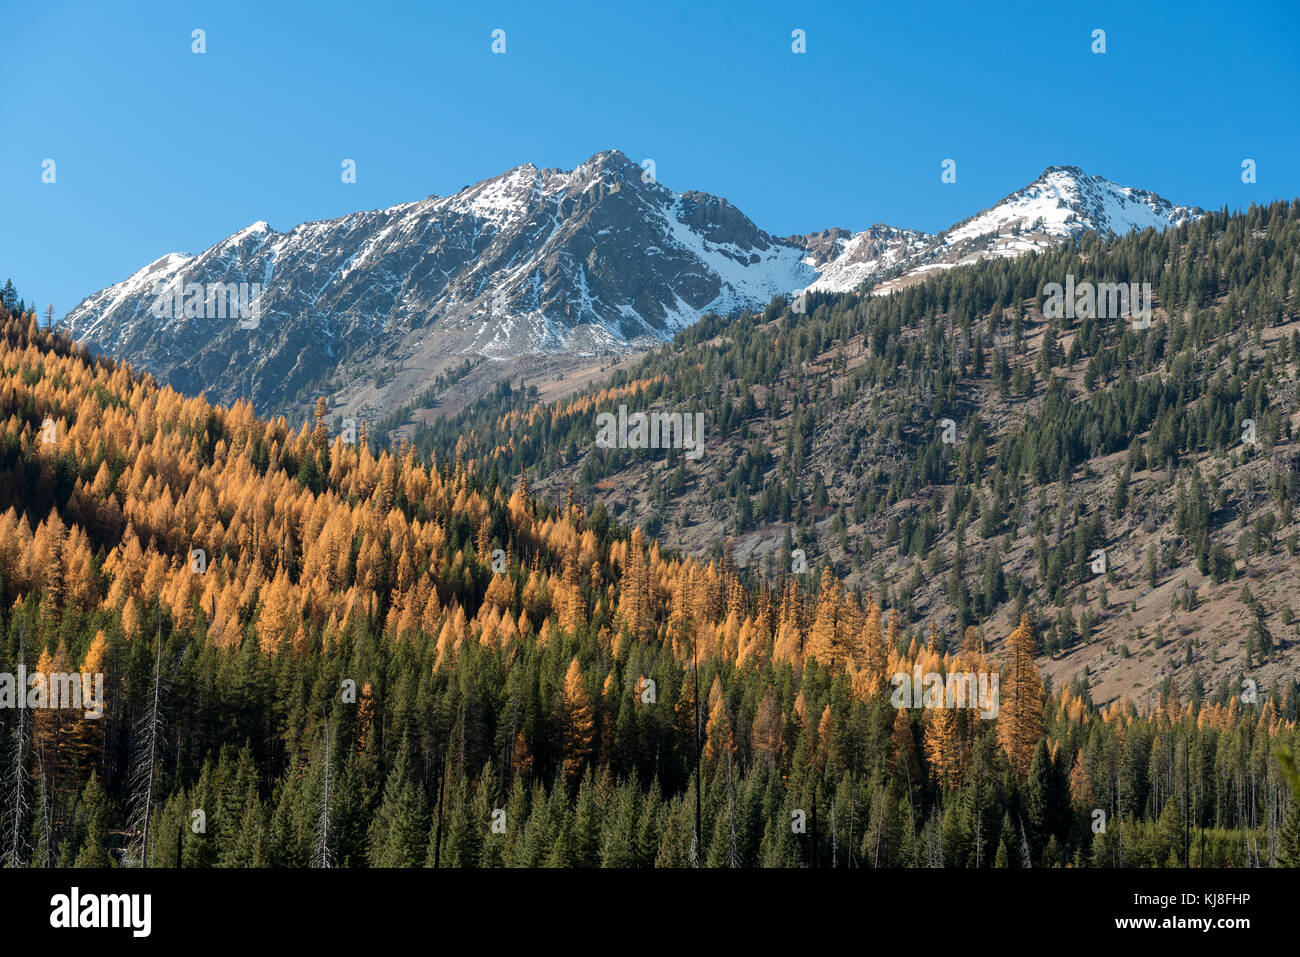 Marble Mountain and a forested slope with Western larch in autumn color, Wallowa Mountains, Oregon. Stock Photo